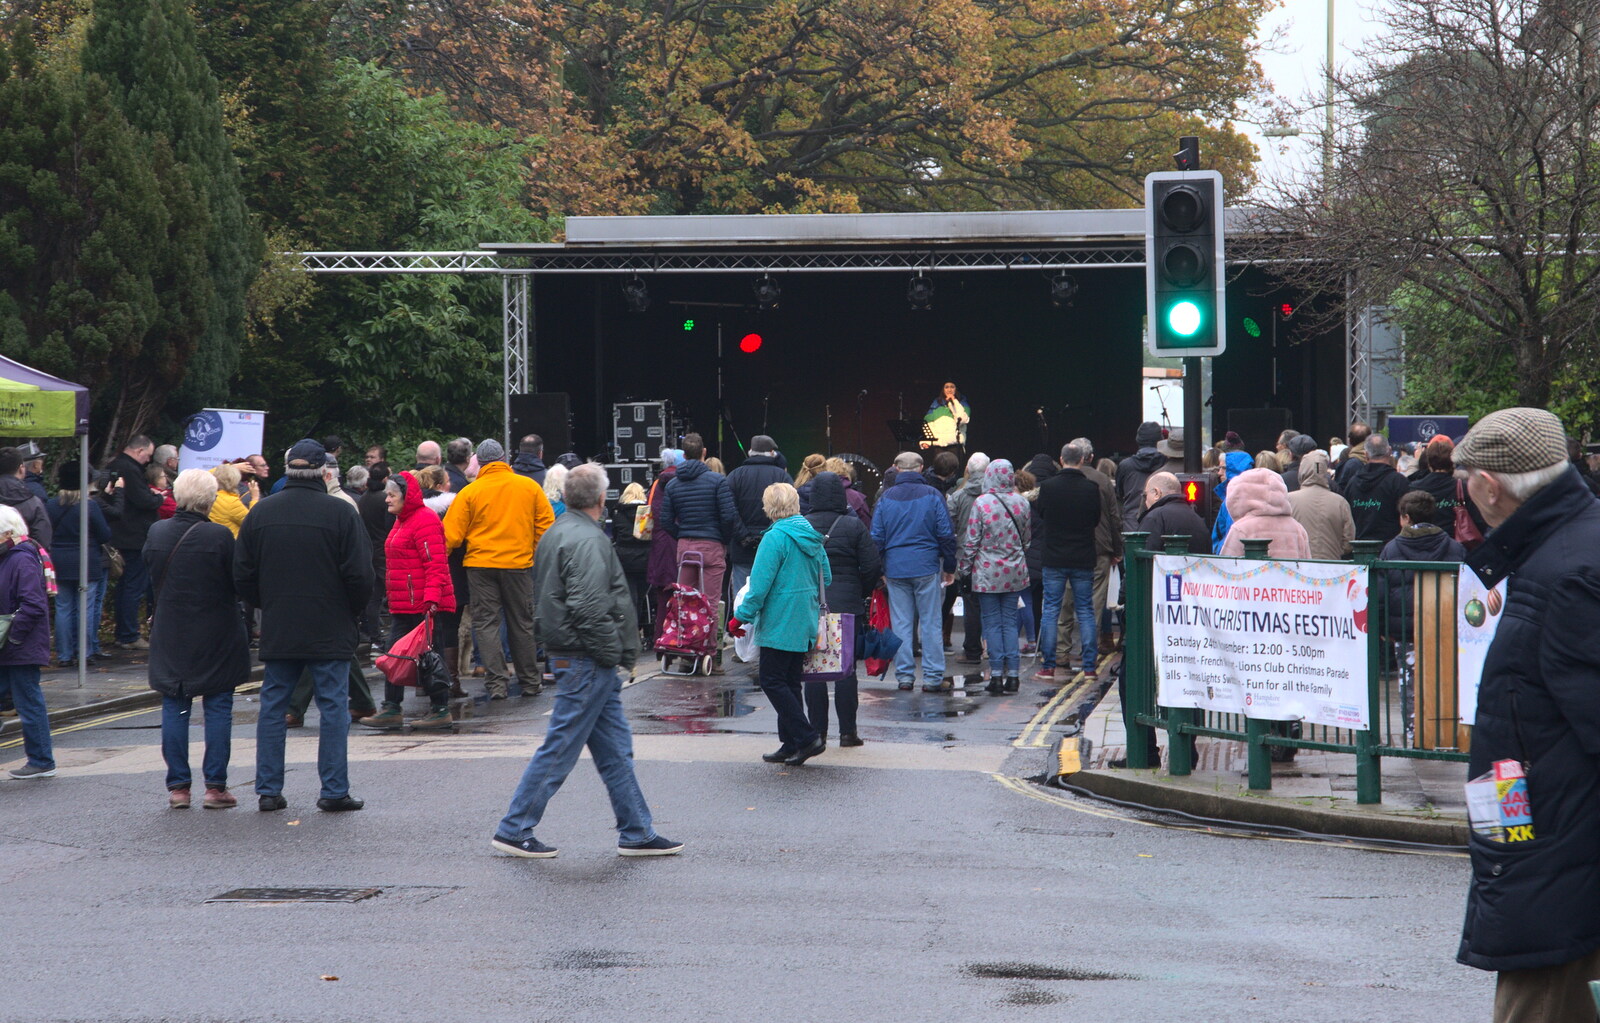 There's a stage set up on Ashley Road from A Christmas Market, New Milton, Hampshire - 24th November 2018